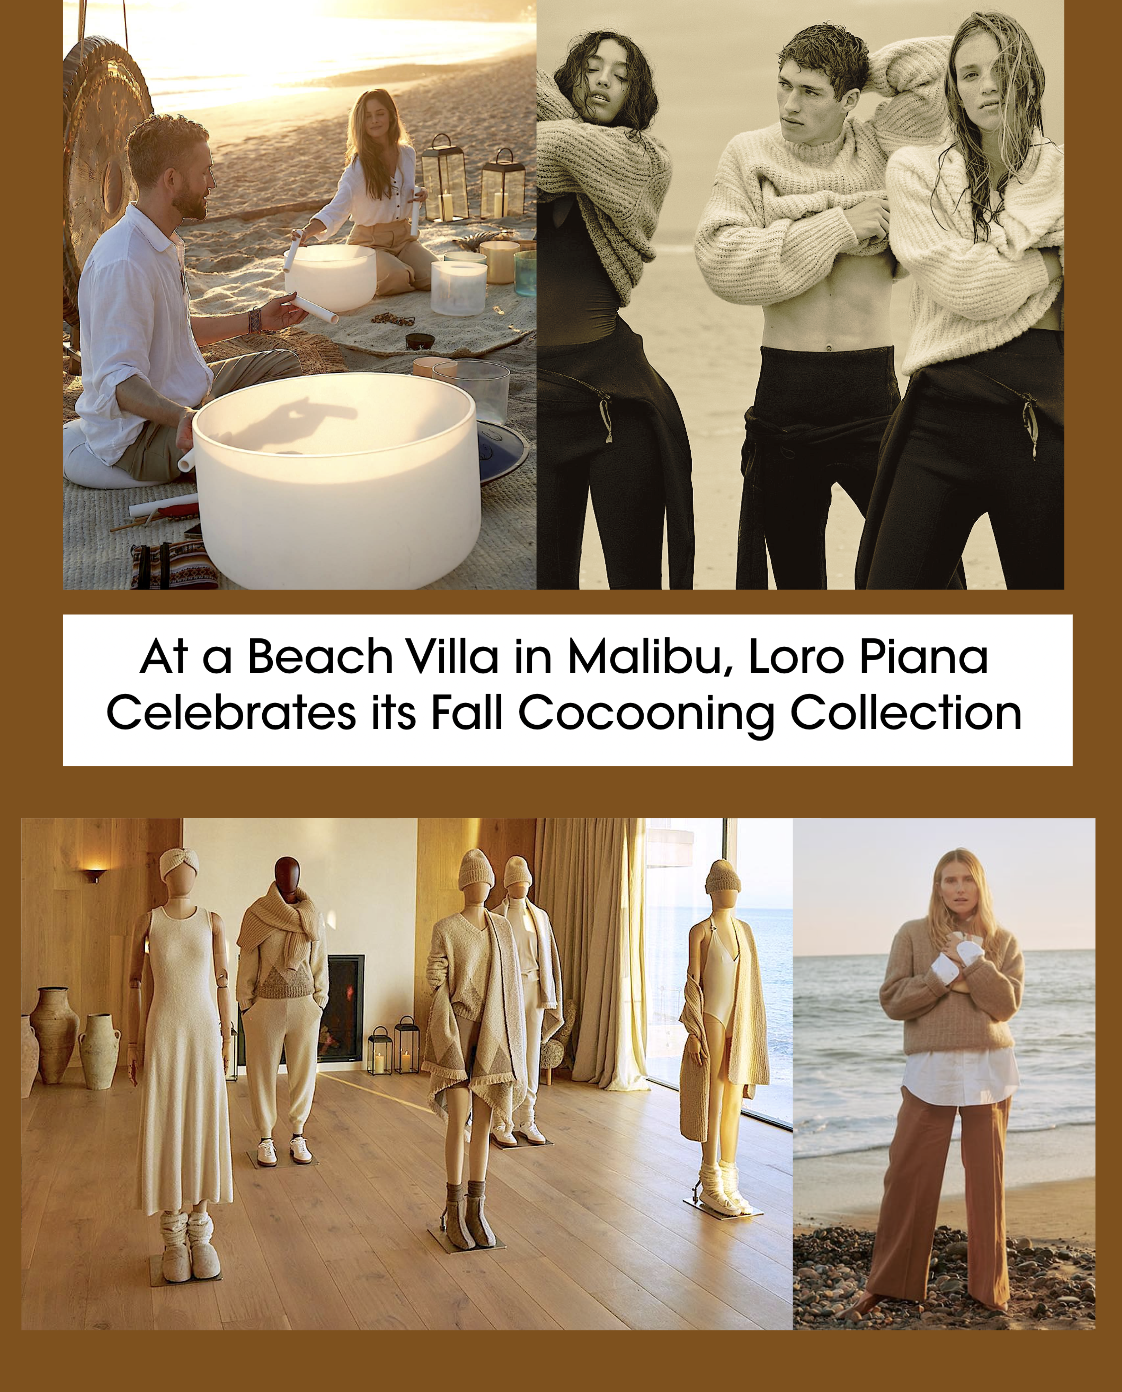 Loro Piana Malibu Dinner for New 'Cocooning Collection' Was a